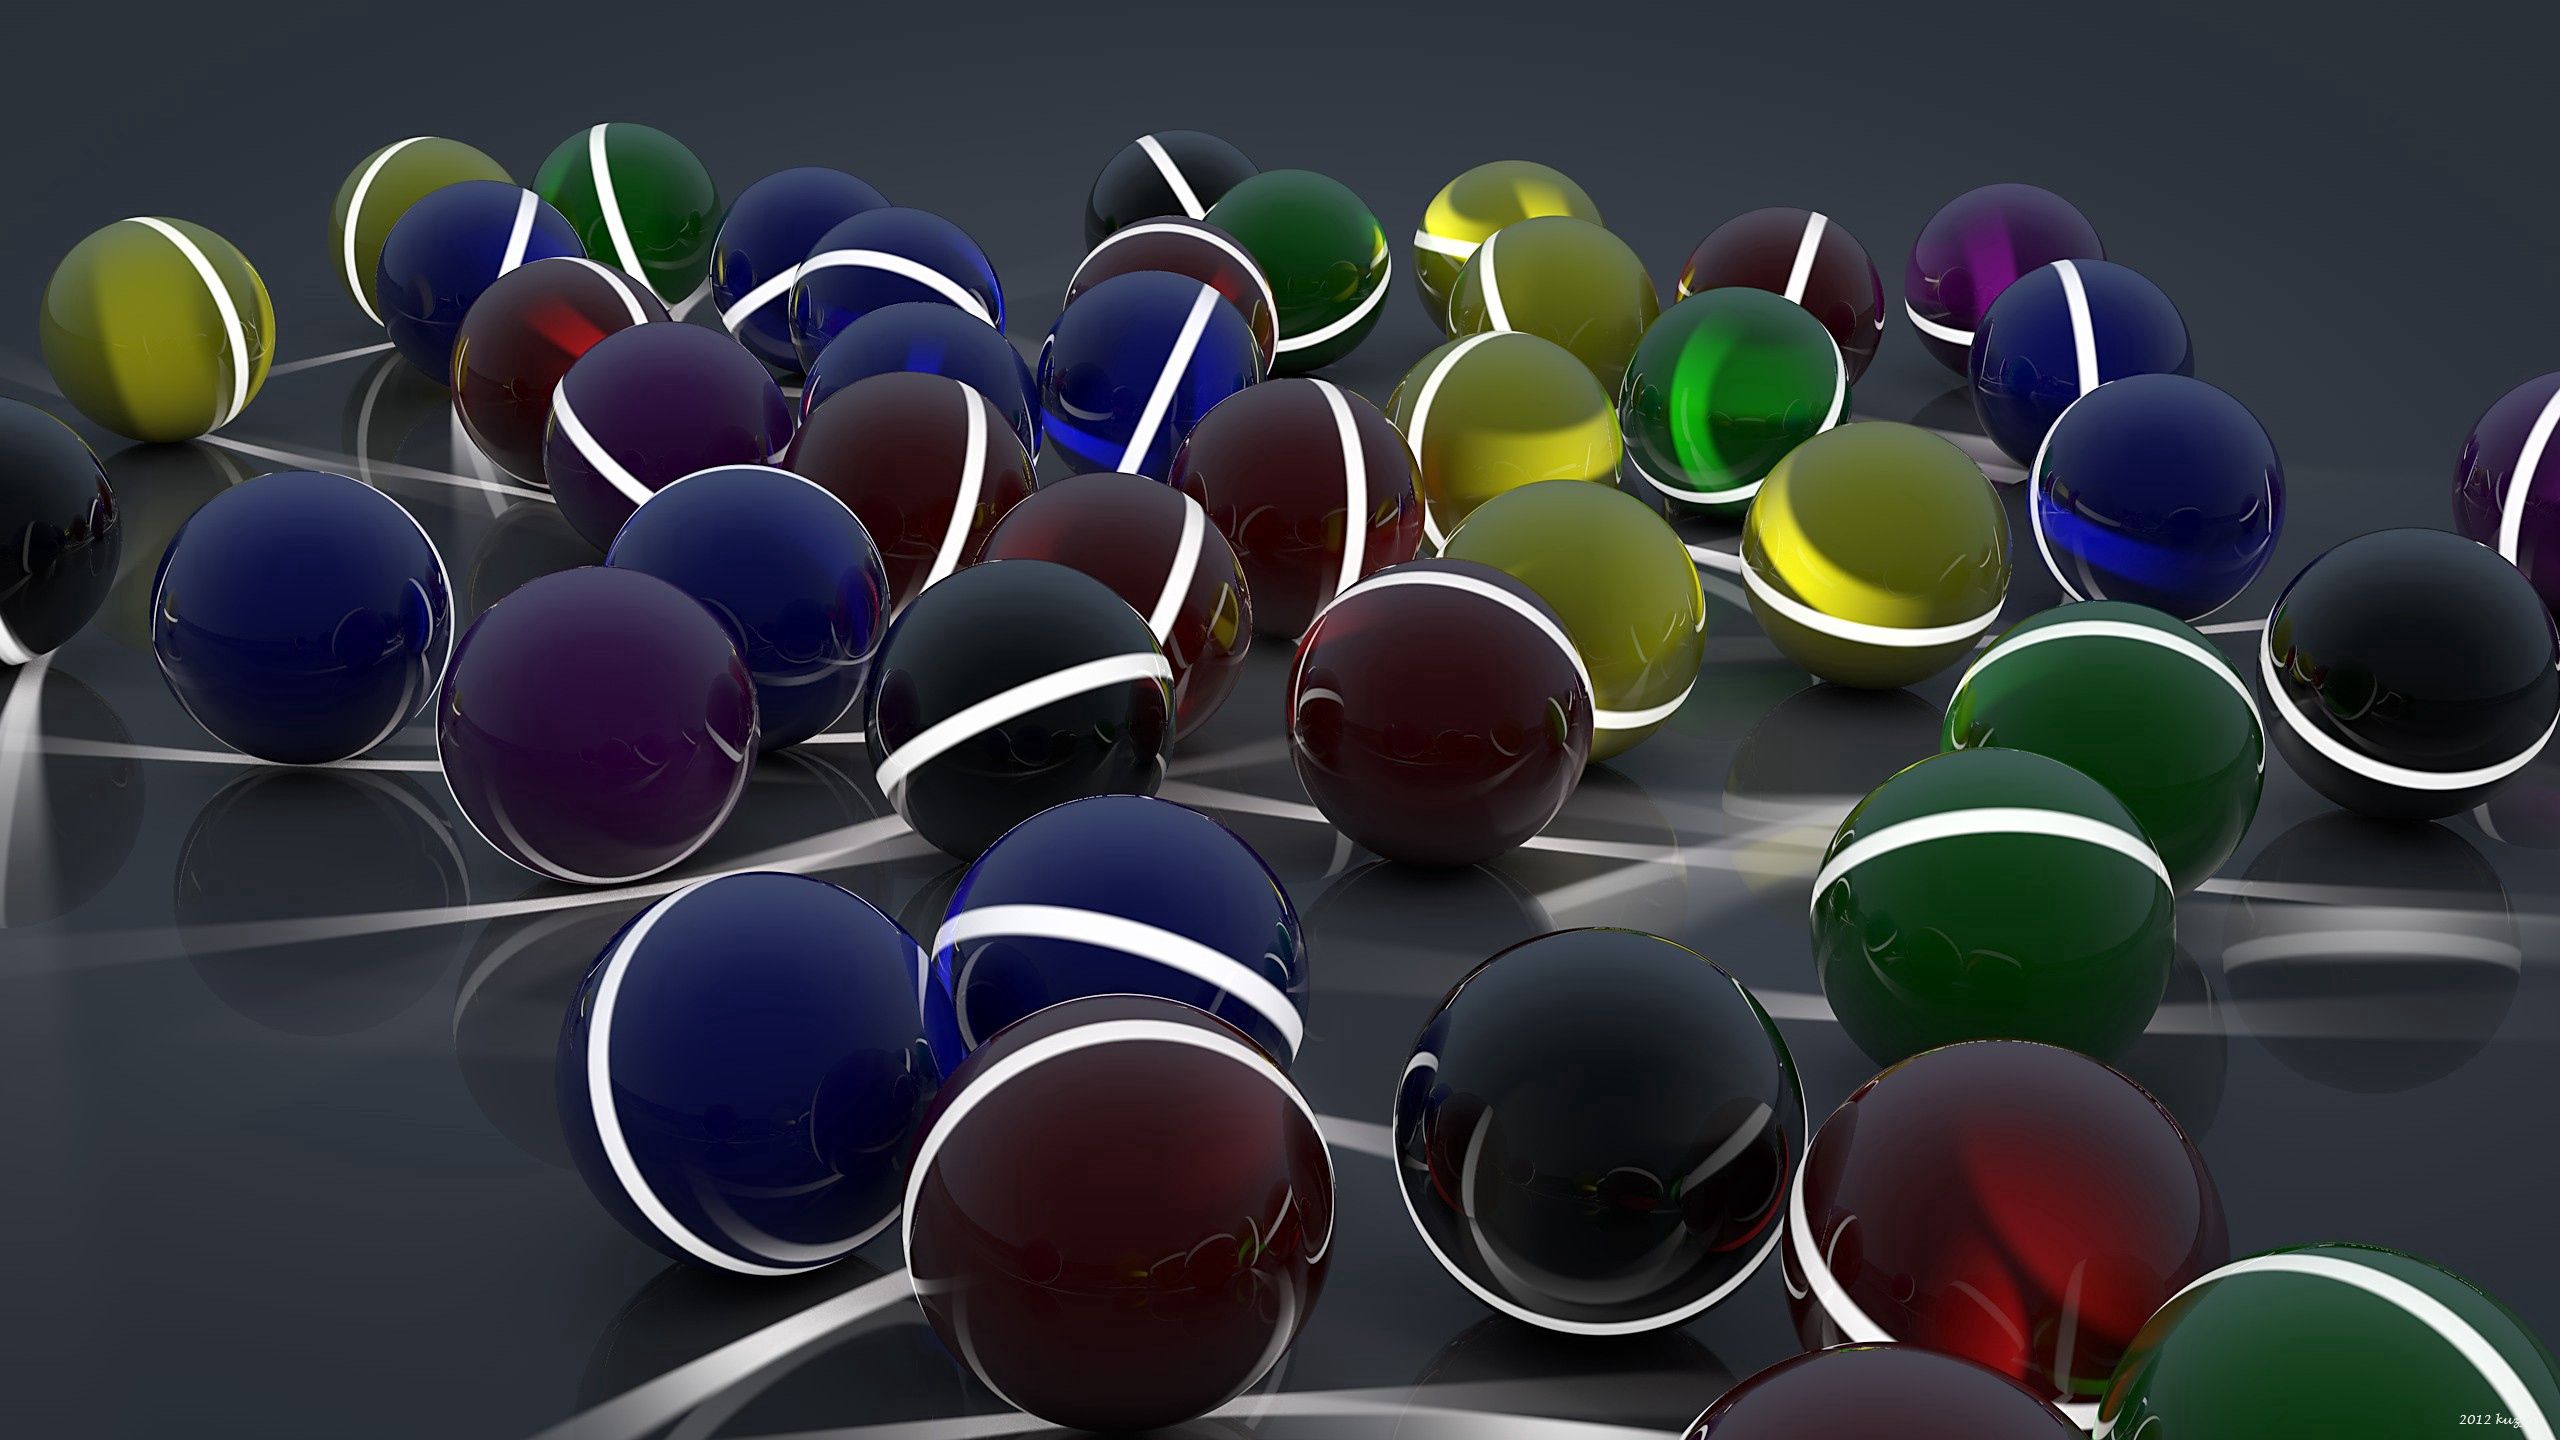 3d, glow, surface, balls, lots of, multitude